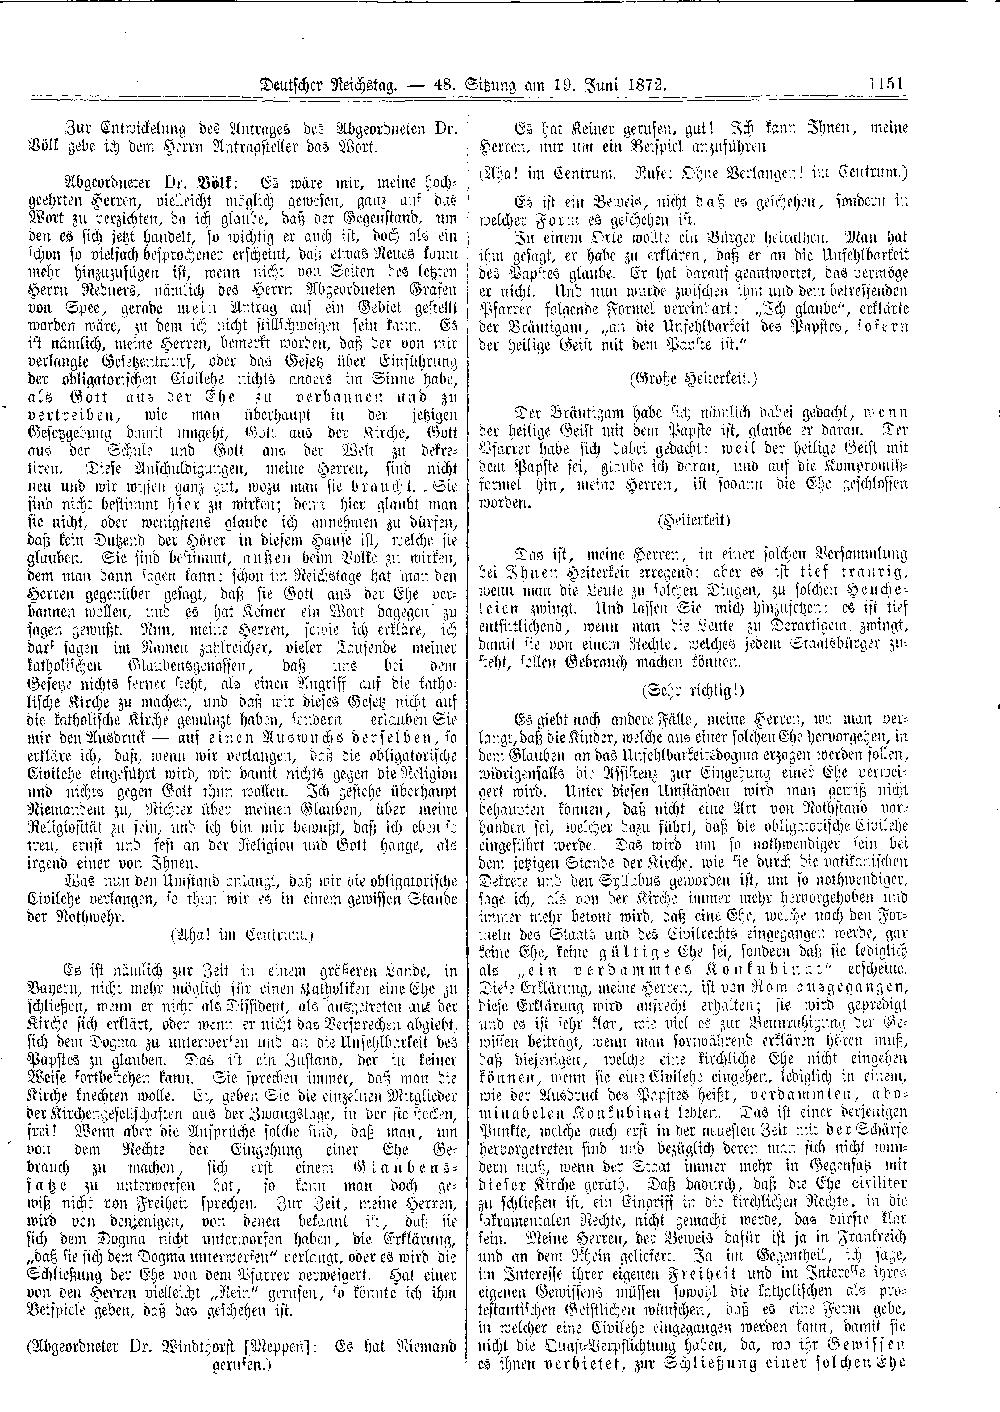 Scan of page 1151